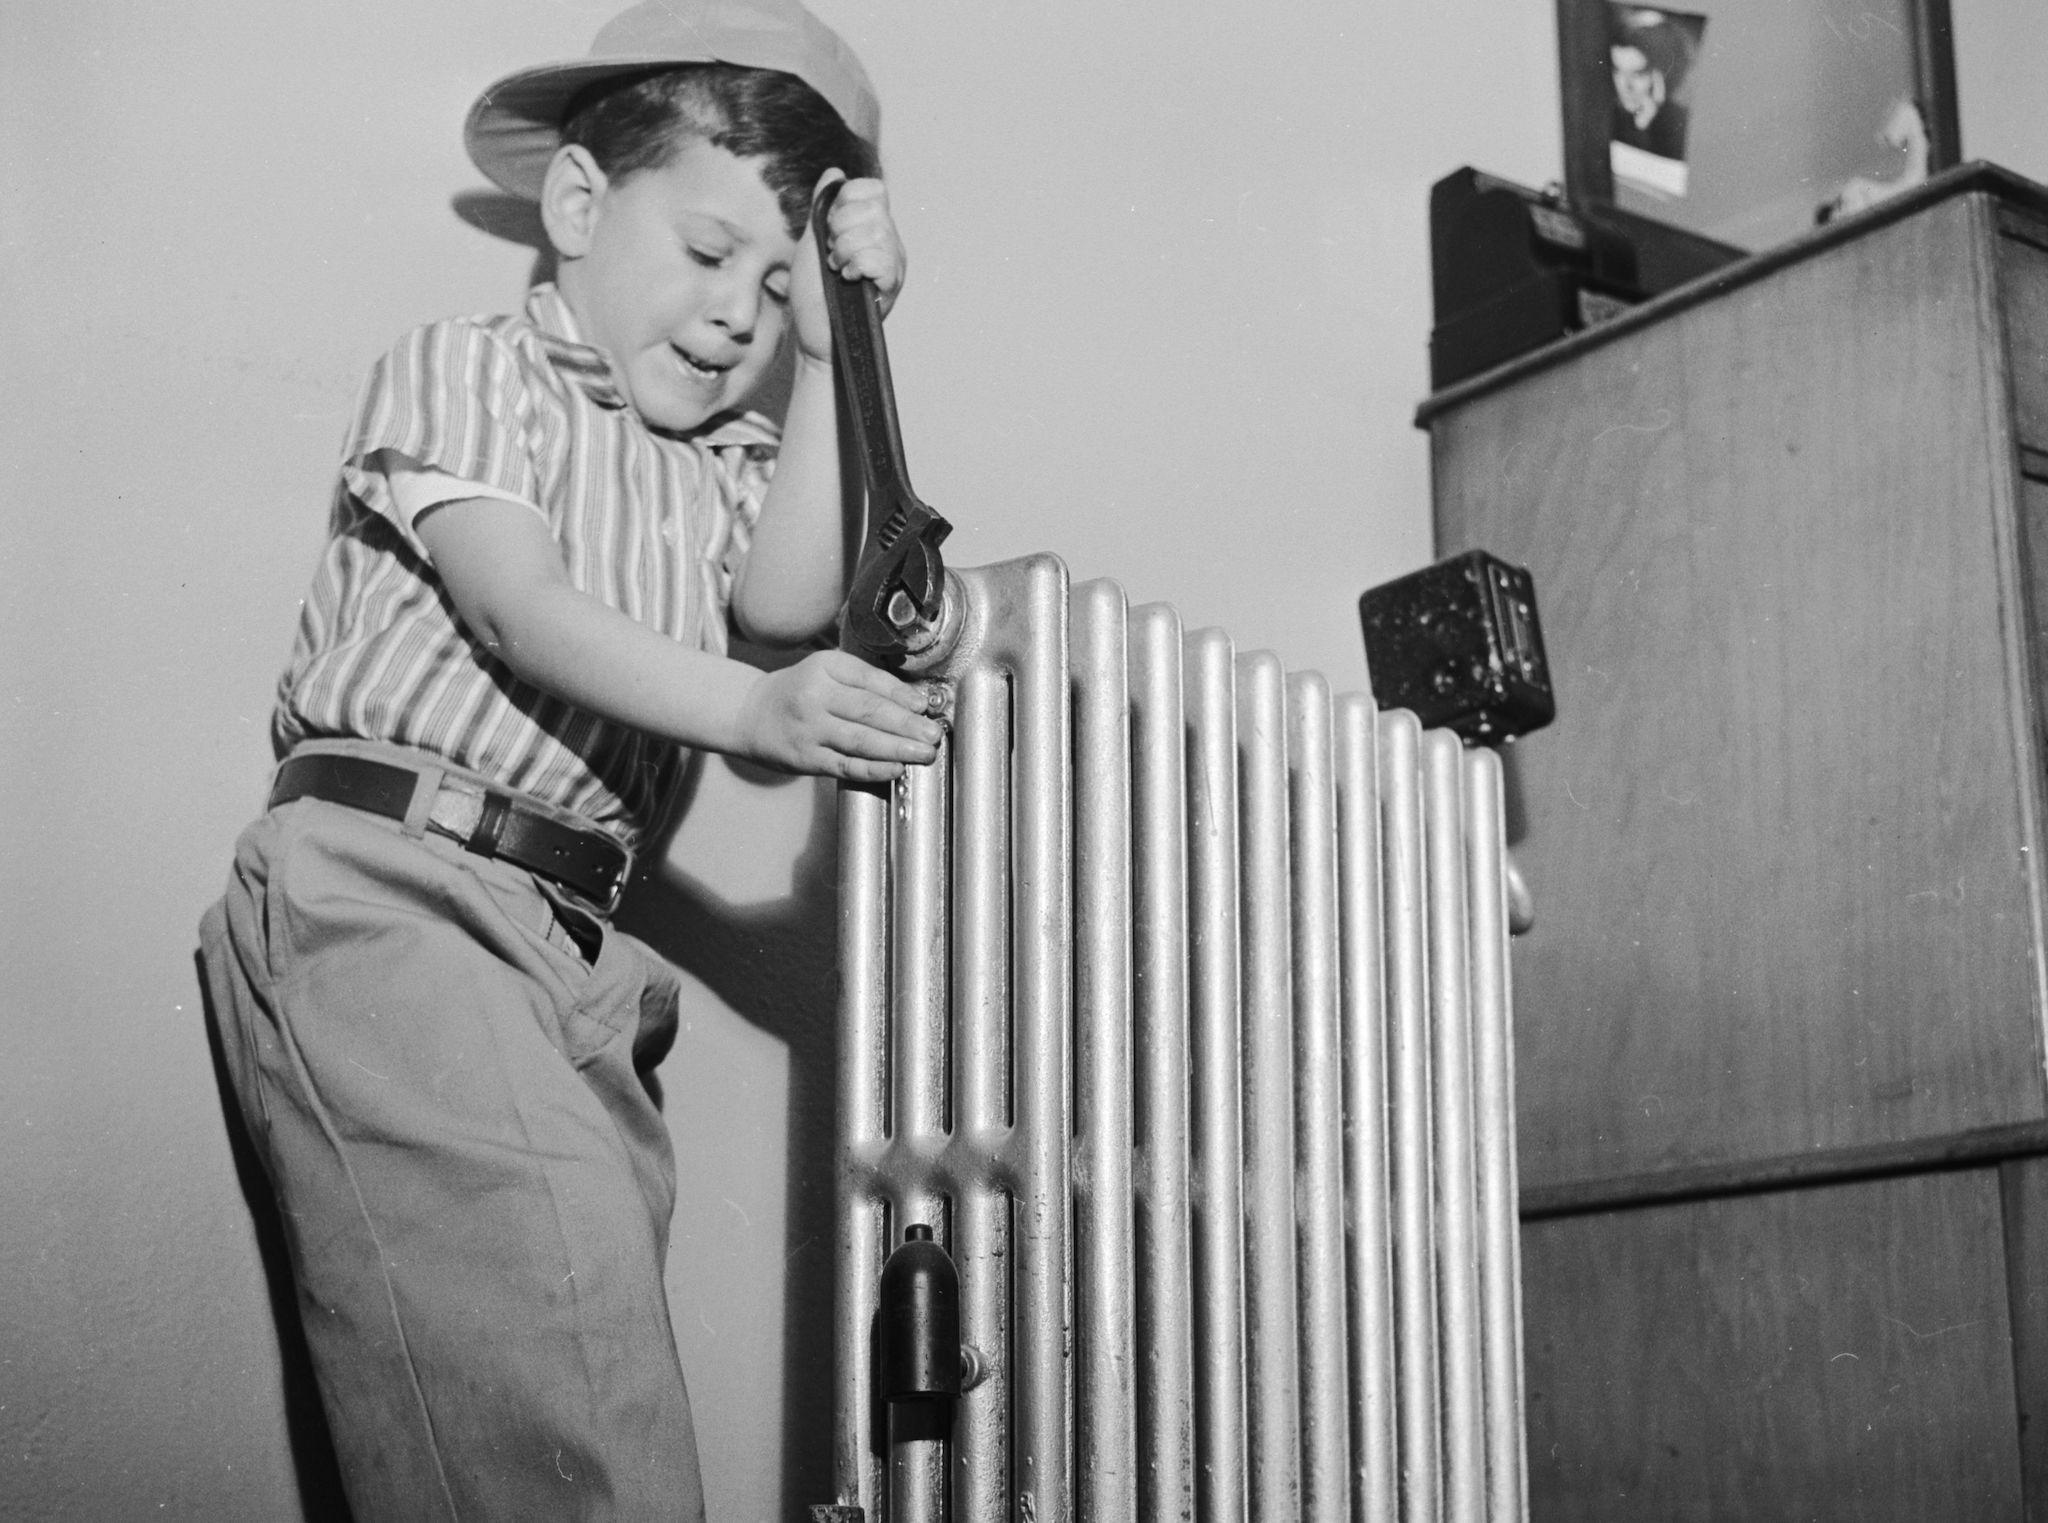 Four year old Morgan Layton tackles the radiator during his somewhat inexpert do-it-youself debut at his home in White Mains, New York